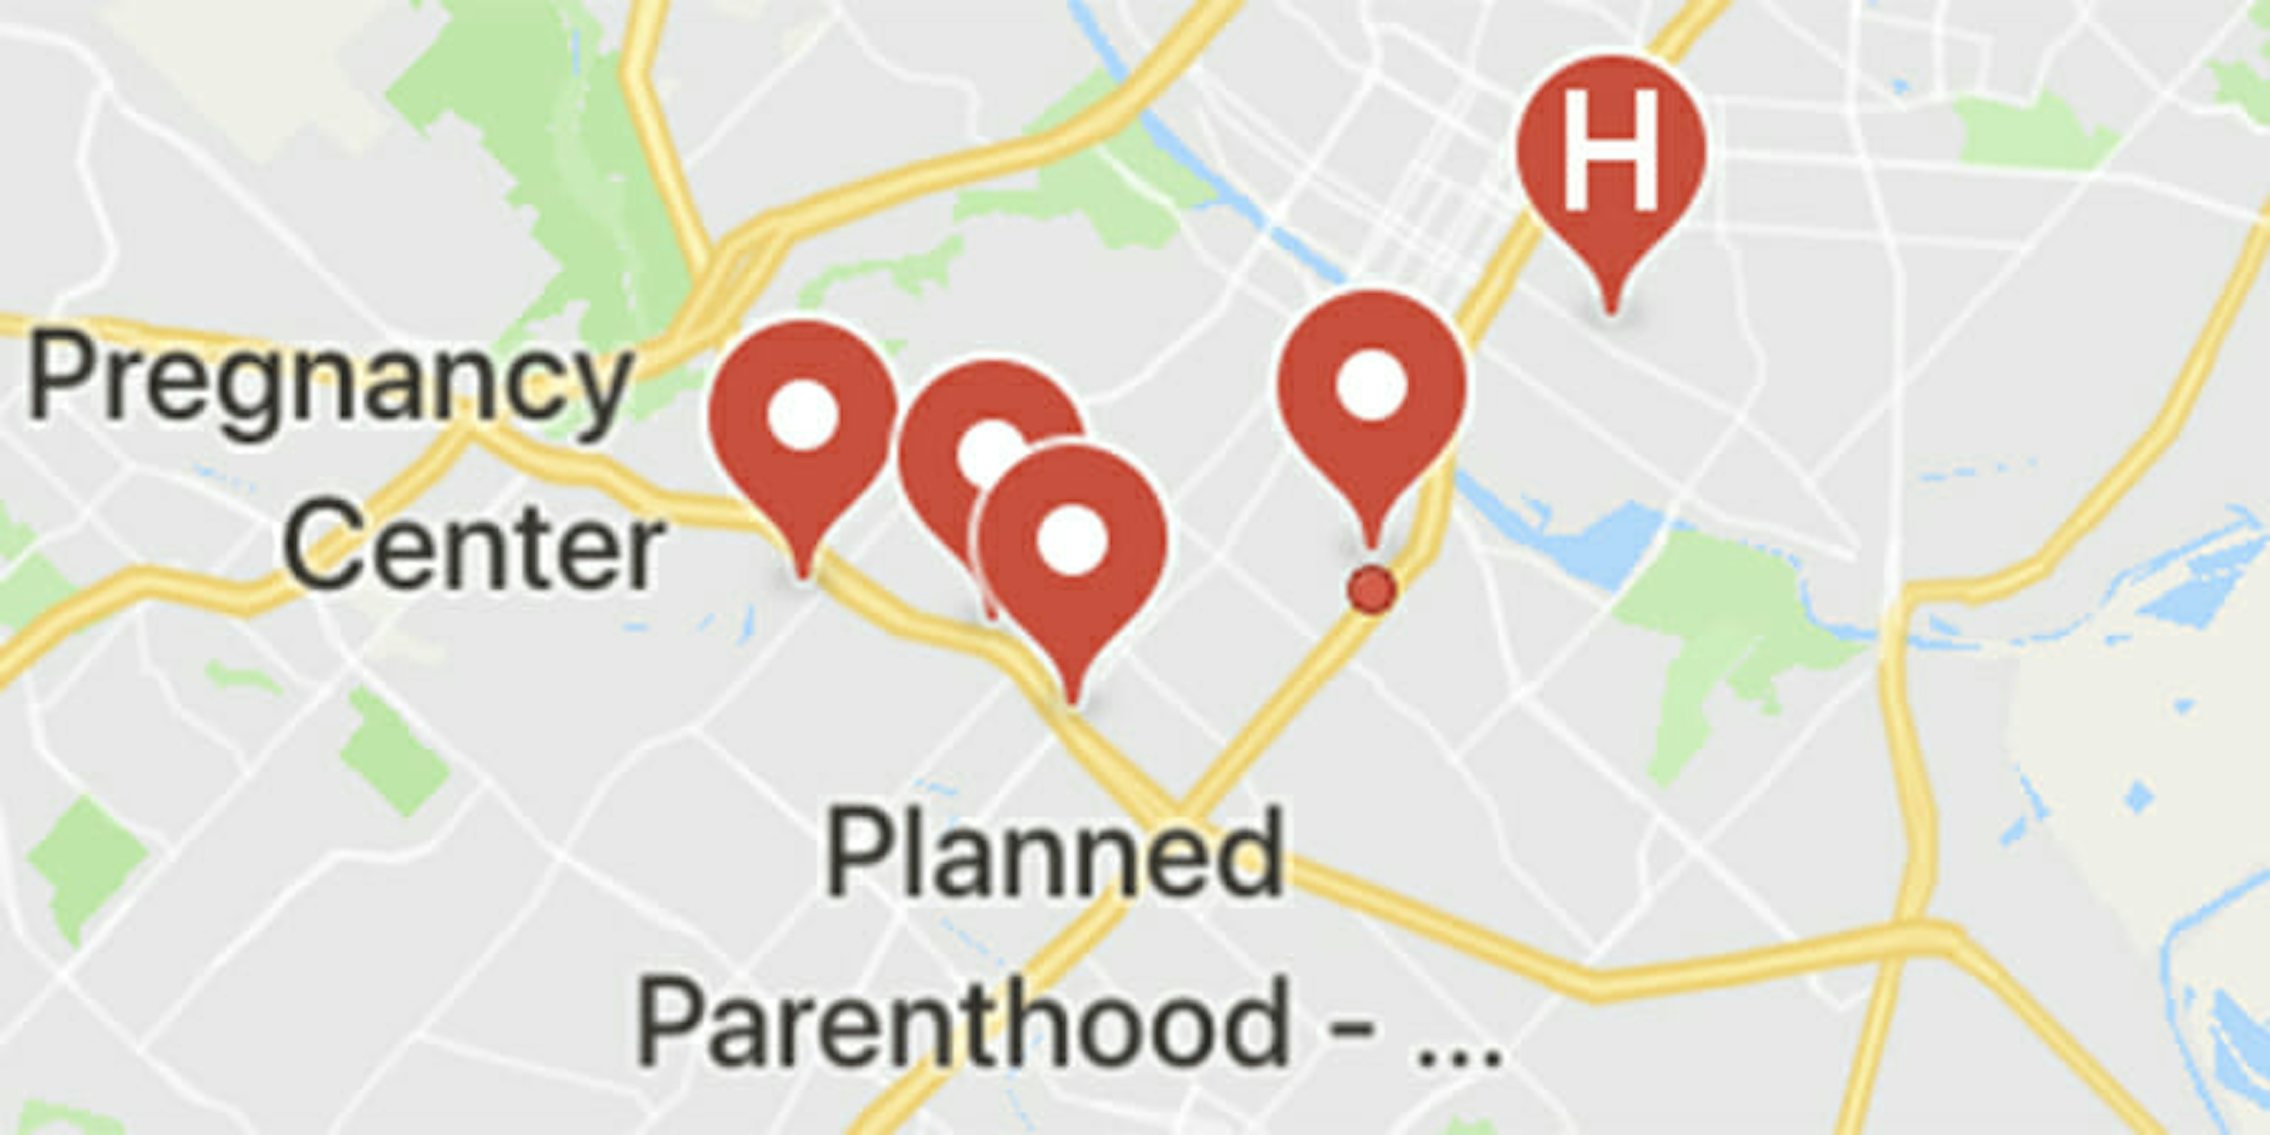 A Gizmodo reports says women could be misled by Google Maps results for 'Where can I get an abortion near me?'